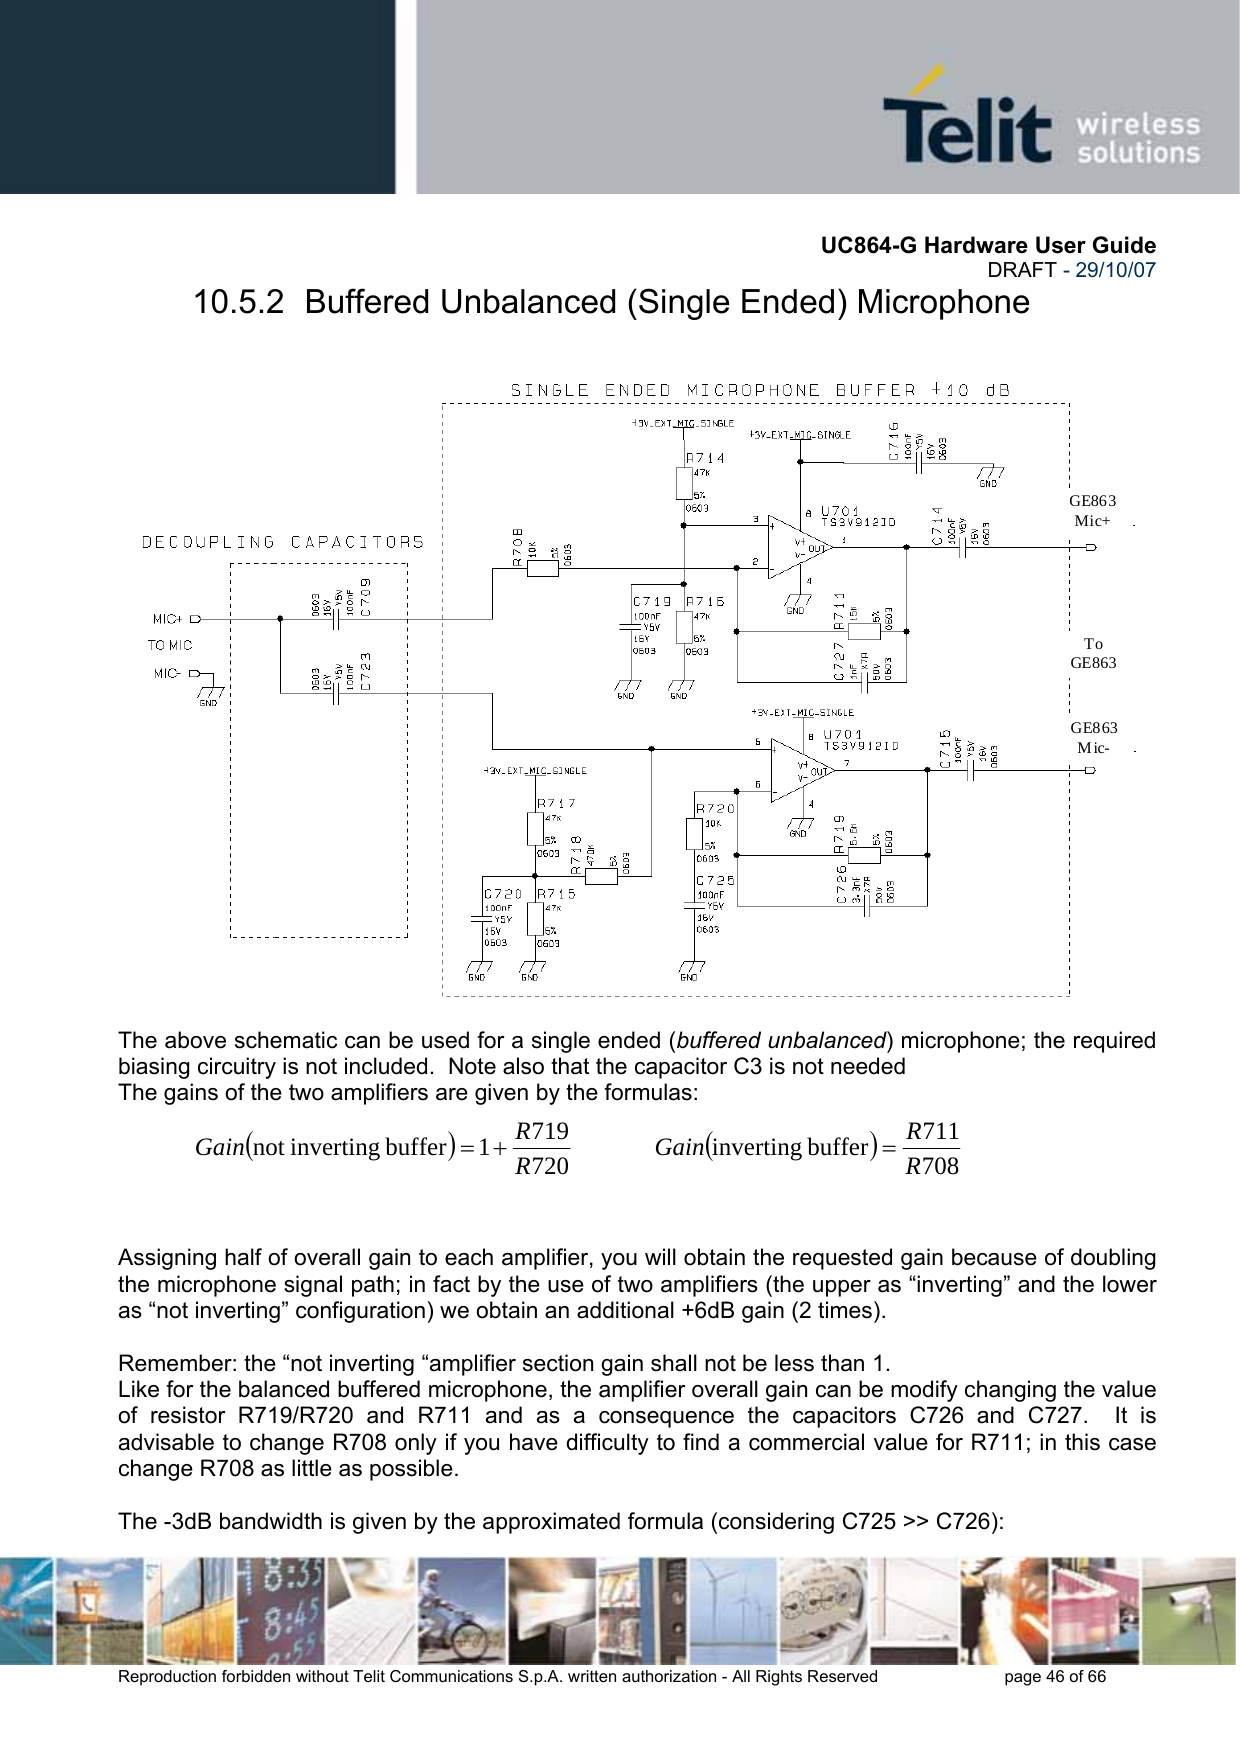       UC864-G Hardware User Guide  DRAFT - 29/10/07      Reproduction forbidden without Telit Communications S.p.A. written authorization - All Rights Reserved    page 46 of 66  10.5.2  Buffered Unbalanced (Single Ended) Microphone    The above schematic can be used for a single ended (buffered unbalanced) microphone; the required biasing circuitry is not included.  Note also that the capacitor C3 is not needed  The gains of the two amplifiers are given by the formulas:  ()7207191buffer invertingnot  RRGain +=             ()708711buffer inverting RRGain =     Assigning half of overall gain to each amplifier, you will obtain the requested gain because of doubling the microphone signal path; in fact by the use of two amplifiers (the upper as “inverting” and the lower as “not inverting” configuration) we obtain an additional +6dB gain (2 times).  Remember: the “not inverting “amplifier section gain shall not be less than 1.   Like for the balanced buffered microphone, the amplifier overall gain can be modify changing the value of resistor R719/R720 and R711 and as a consequence the capacitors C726 and C727.  It is advisable to change R708 only if you have difficulty to find a commercial value for R711; in this case change R708 as little as possible.    The -3dB bandwidth is given by the approximated formula (considering C725 &gt;&gt; C726): 2,7nF 6,8nF  To GE863GE863 Mic+ GE863 Mic- 